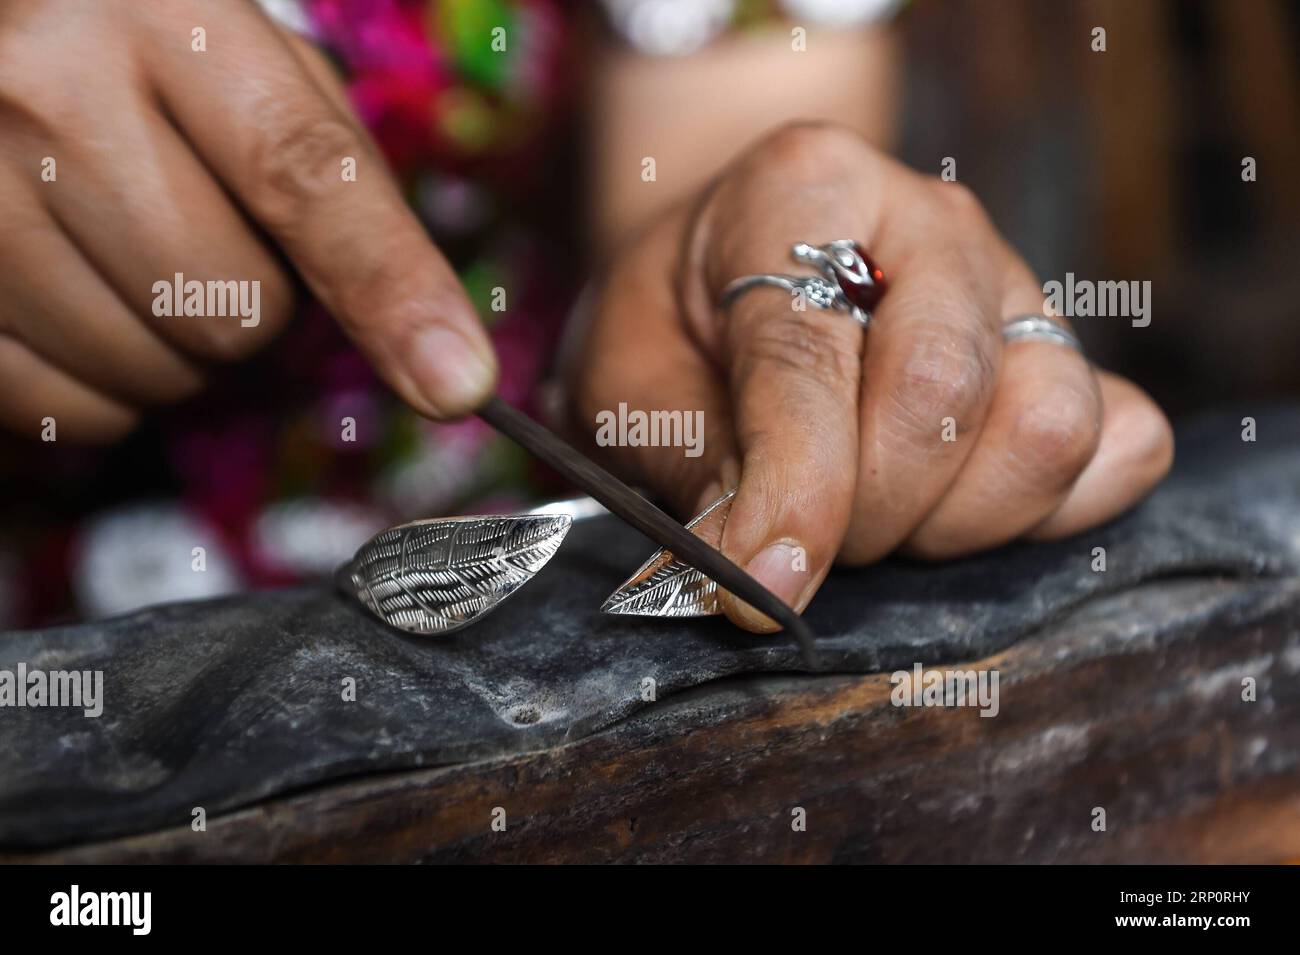 (180523) -- KAILI, May 23, 2018 -- Yang Changlan polishes silverwork in Hongxi Village in Wanshui Township of Kaili, southwest China s Guizhou Province, May 22, 2018. The 36-year-old Yang Changlan has engaged in silverwork making for 12 years. In 2017, Yang and her husband founded a silverwork cooperative and helped other villagers to increase income. )(mcg) CHINA-GUIZHOU-KAILI-SILVERSMITH (CN) TaoxLiang PUBLICATIONxNOTxINxCHN Stock Photo